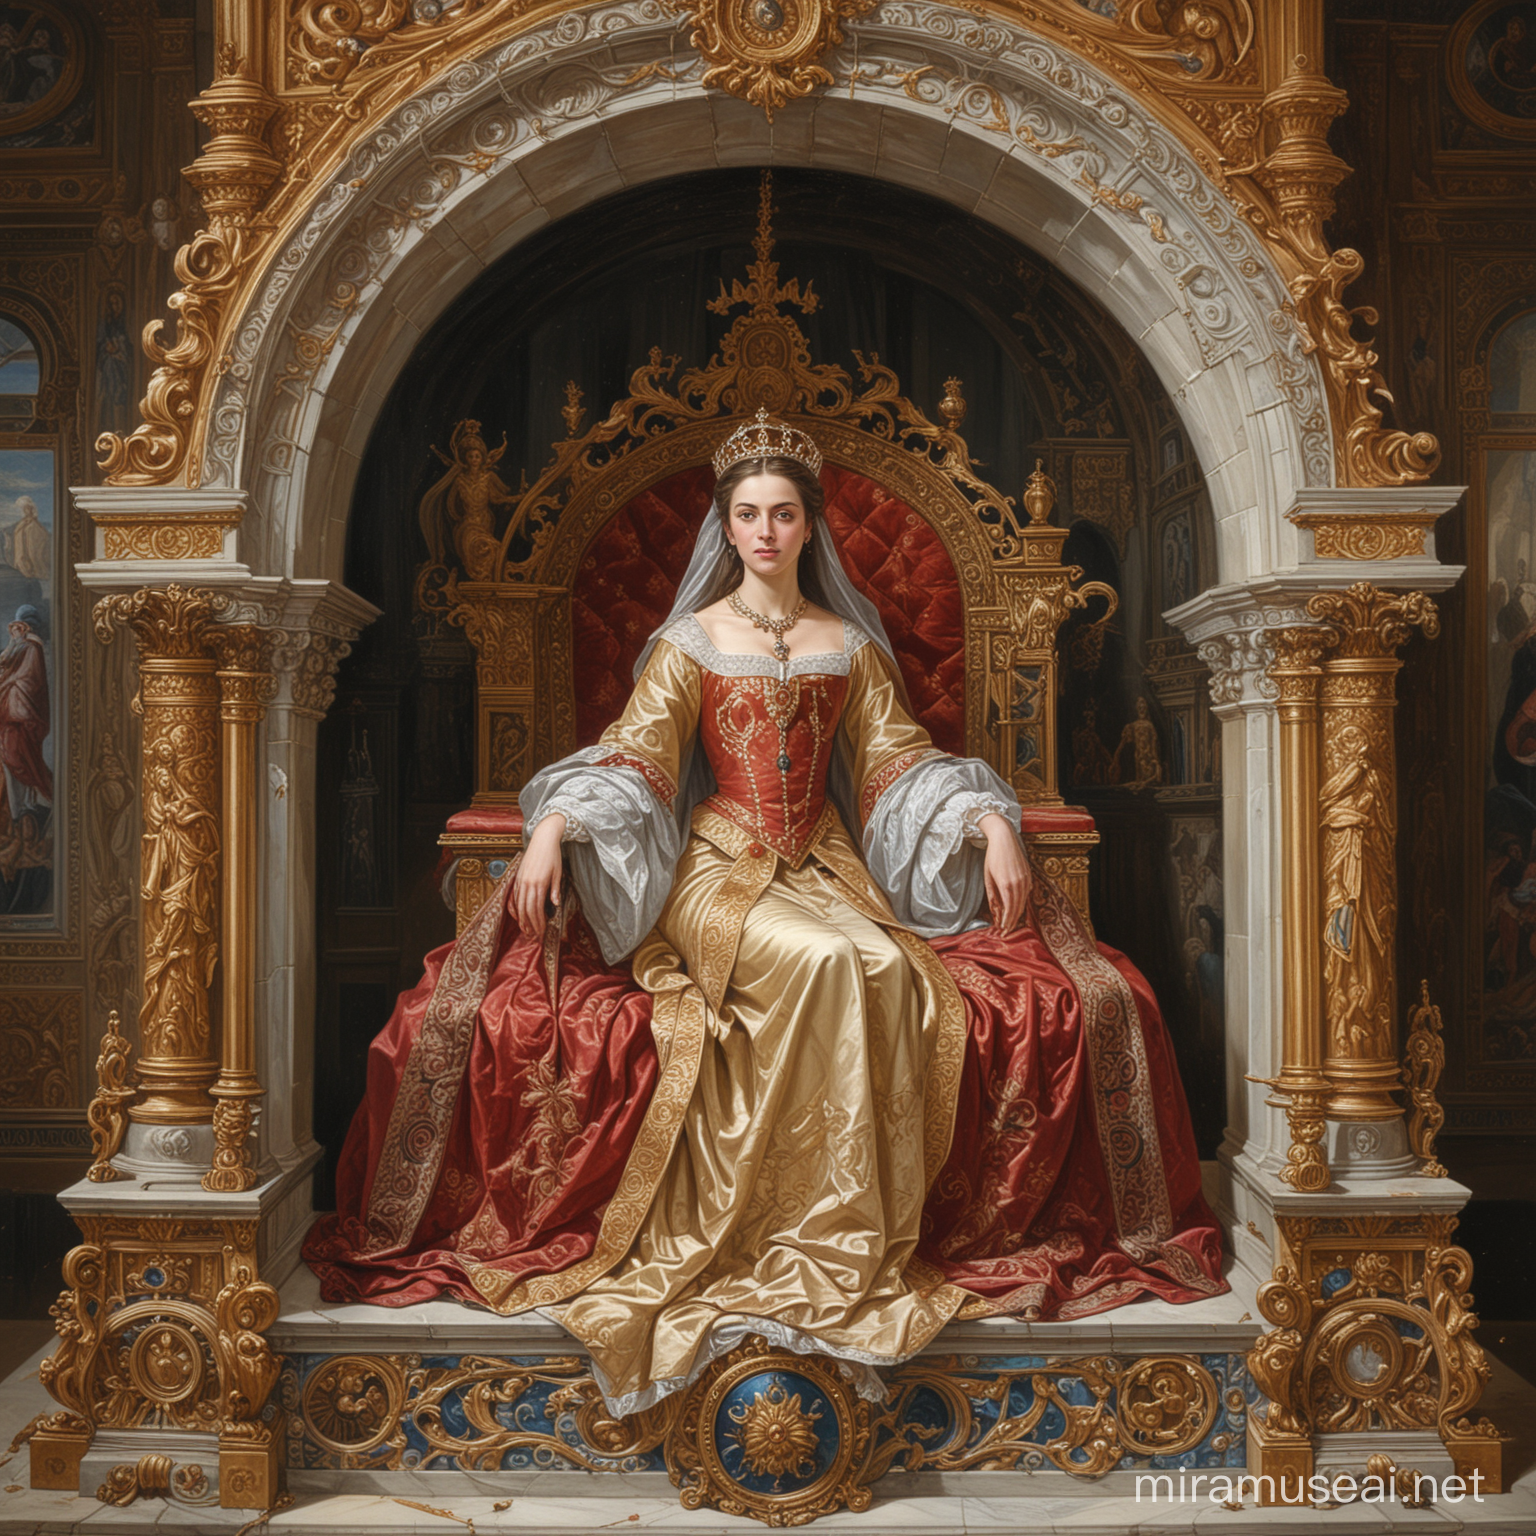 Countess Ilis Countofe of Kildare on Throne in Ornate Cathedral with Clock at 10 oclock Position